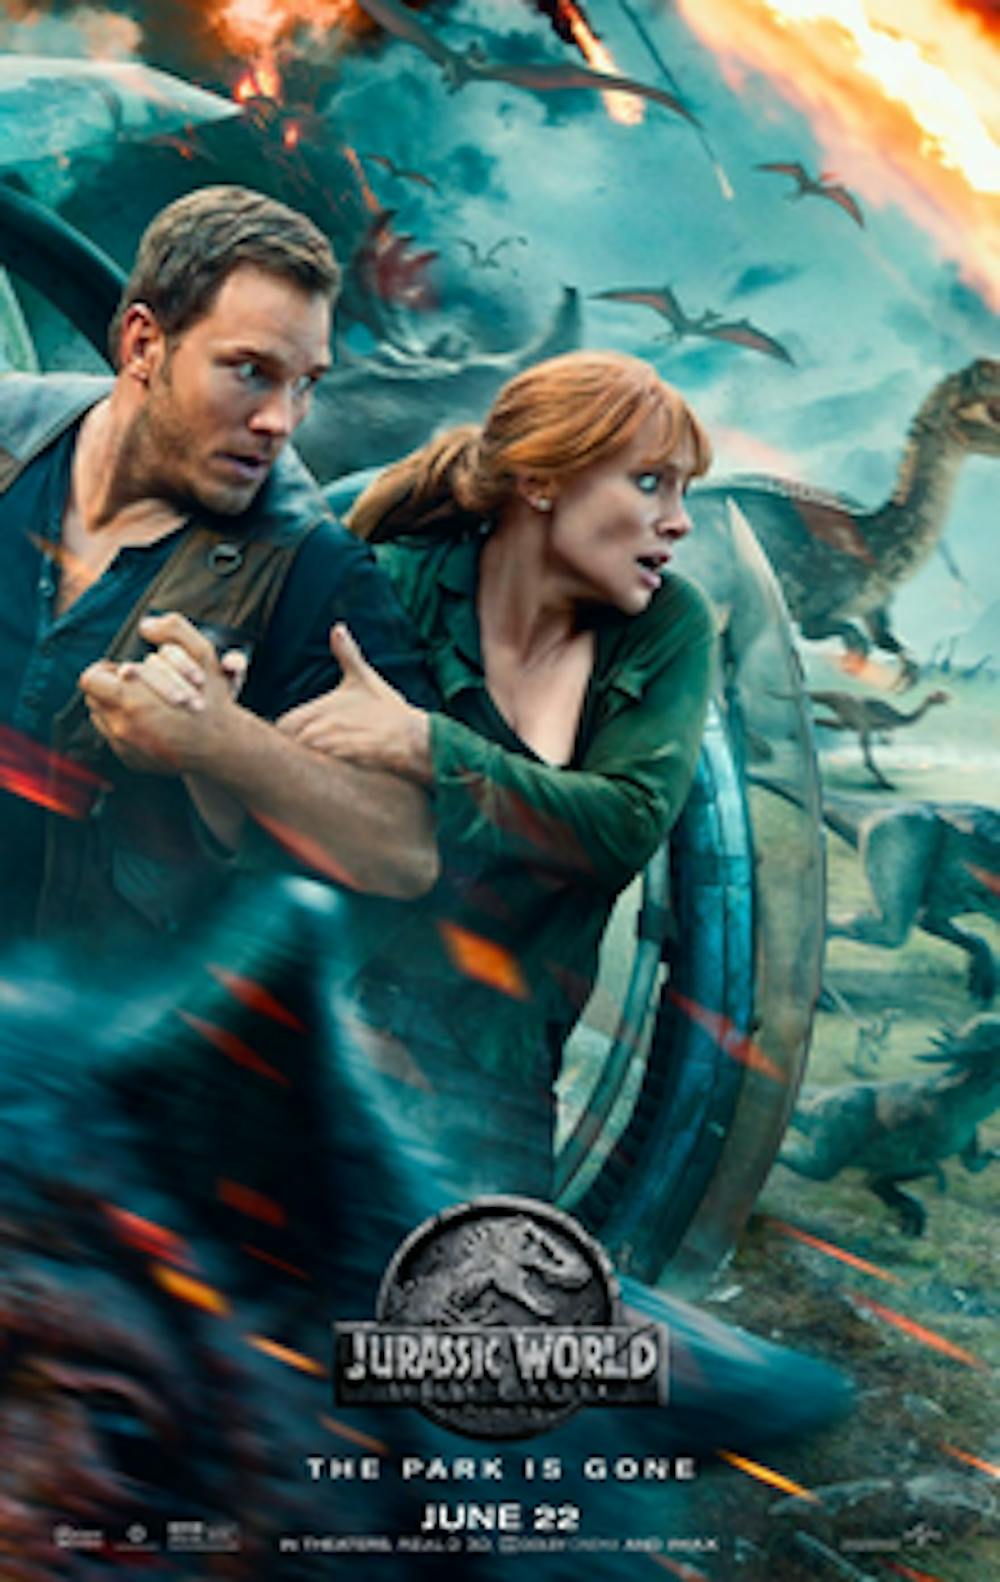 It has its entertaining, flashy moments, but "Jurassic World: Fallen Kingdom" is hindered by a needlessly complicated plot and stale dialogue.